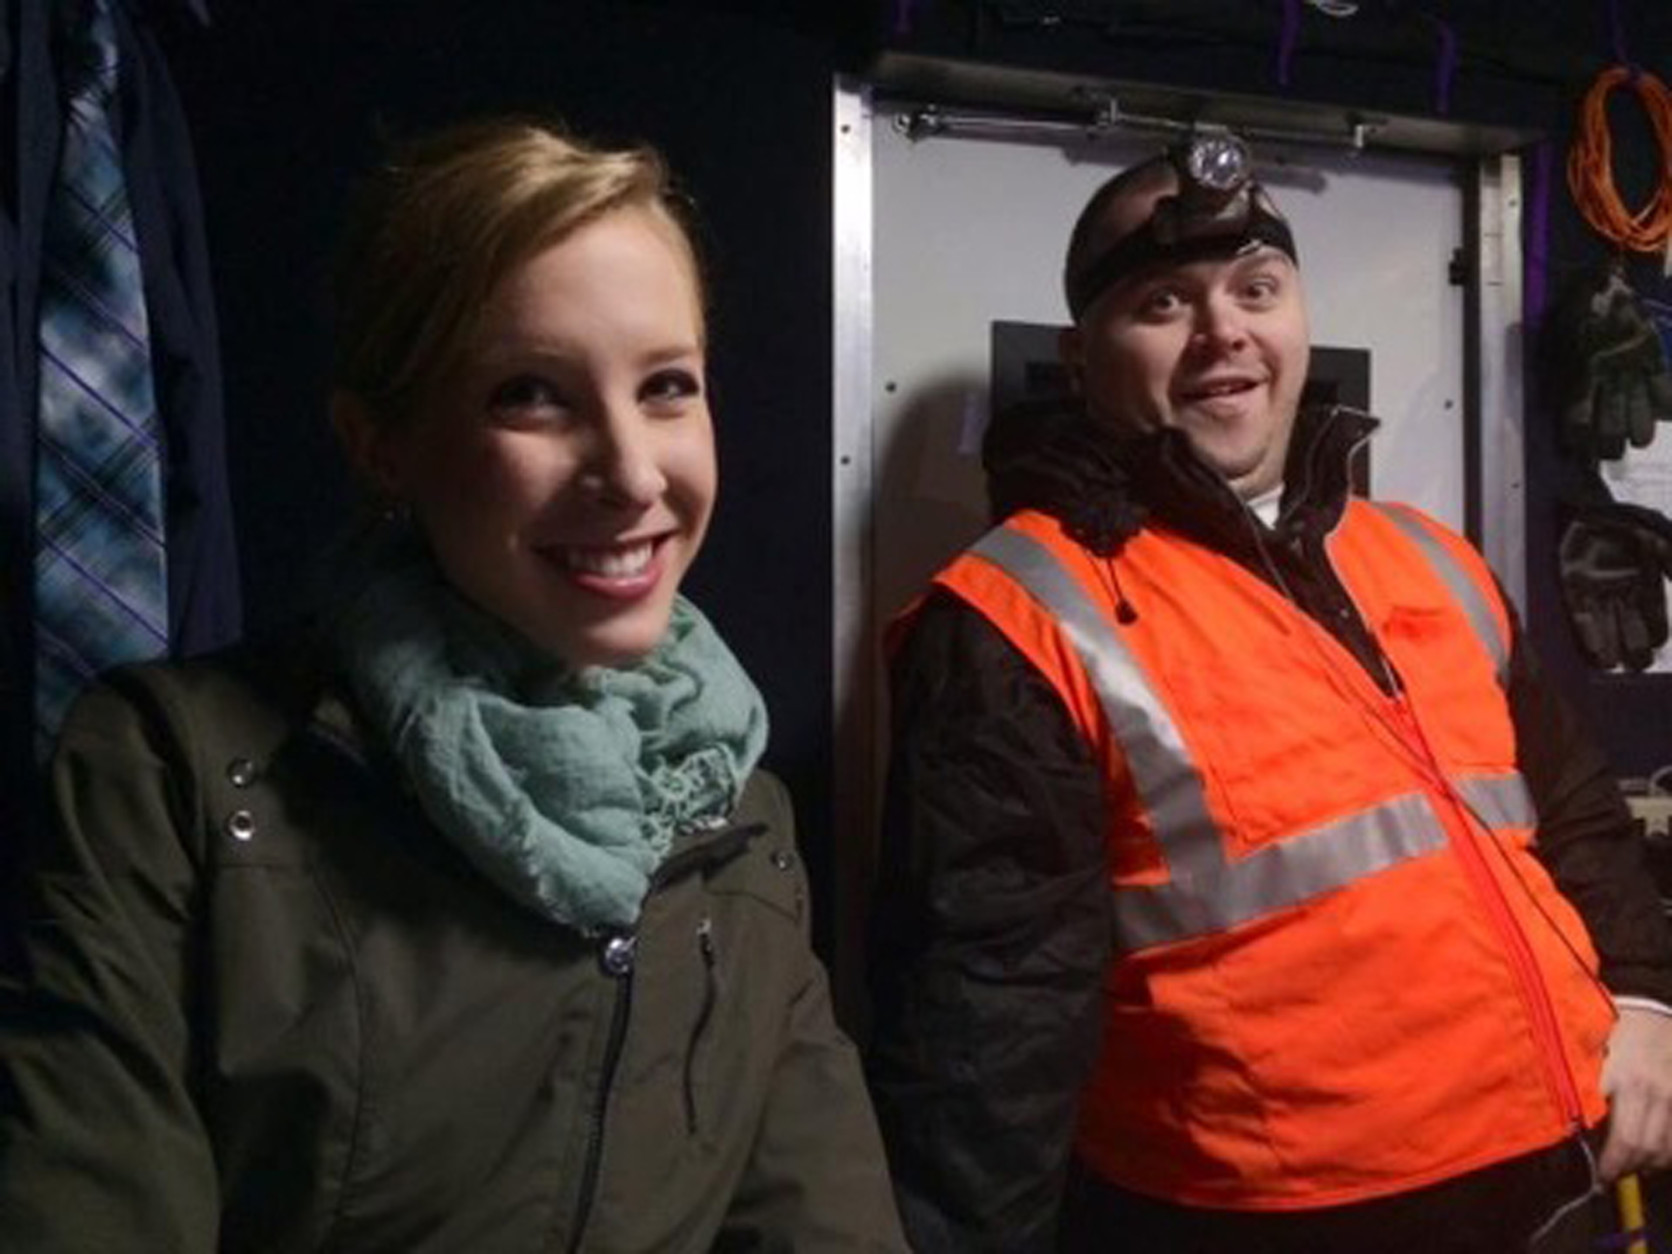 This undated photograph made available by WDBJ-TV shows reporter Alison Parker, left, and cameraman Adam Ward. Parker and Ward were fatally shot during an on-air interview, Wednesday, Aug. 26, 2015, in Moneta, Va. (Courtesy of WDBJ-TV via AP) 